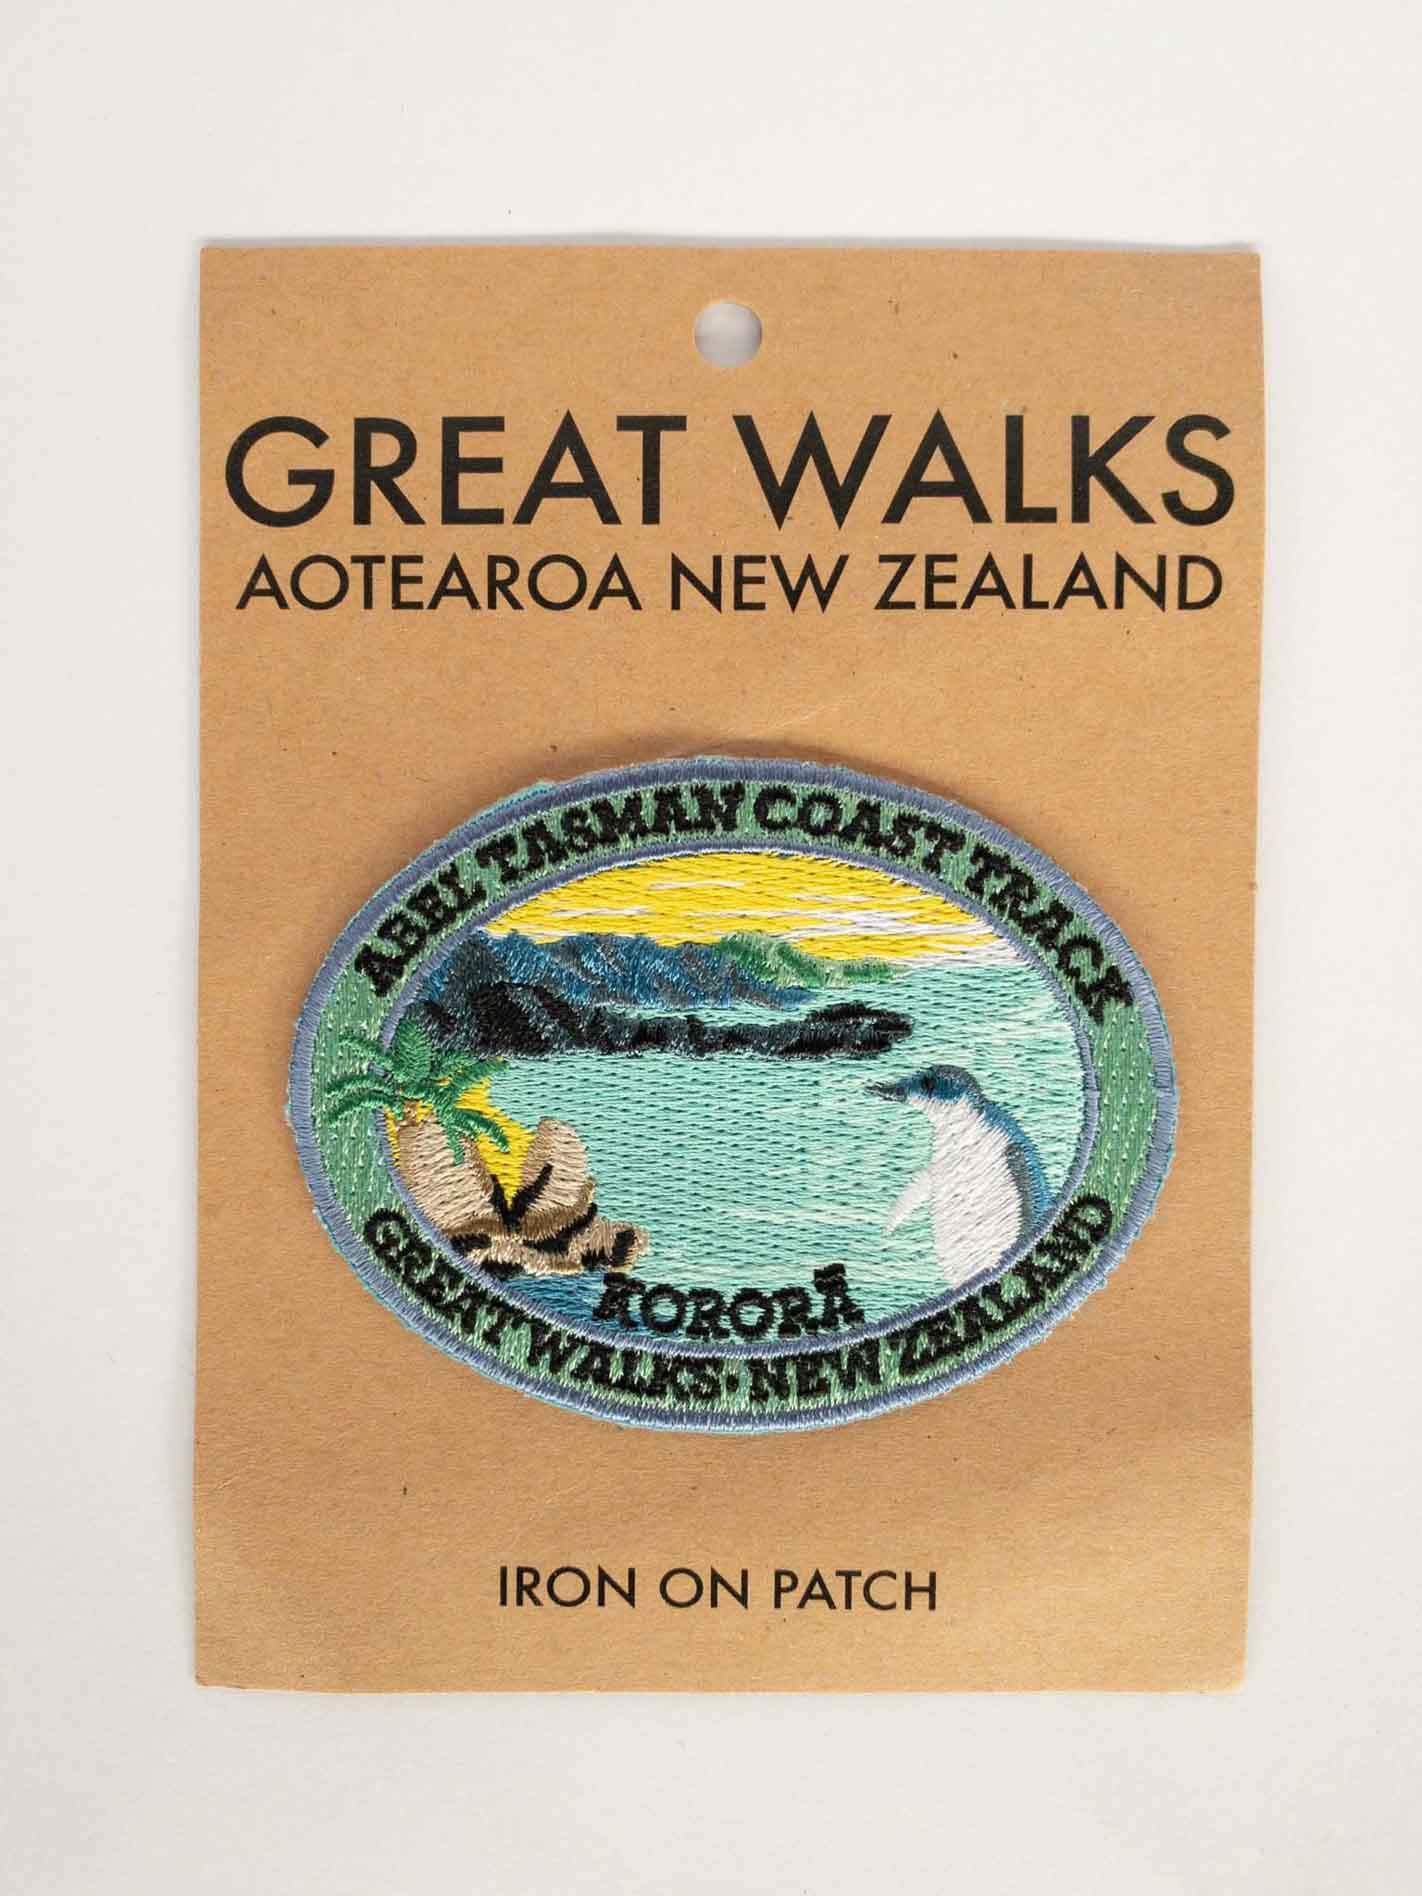 Oval, embroidered Abel Tasman Coast Track patch, with a penguin, blue sea and yellow sky, on brown kraft backing card.